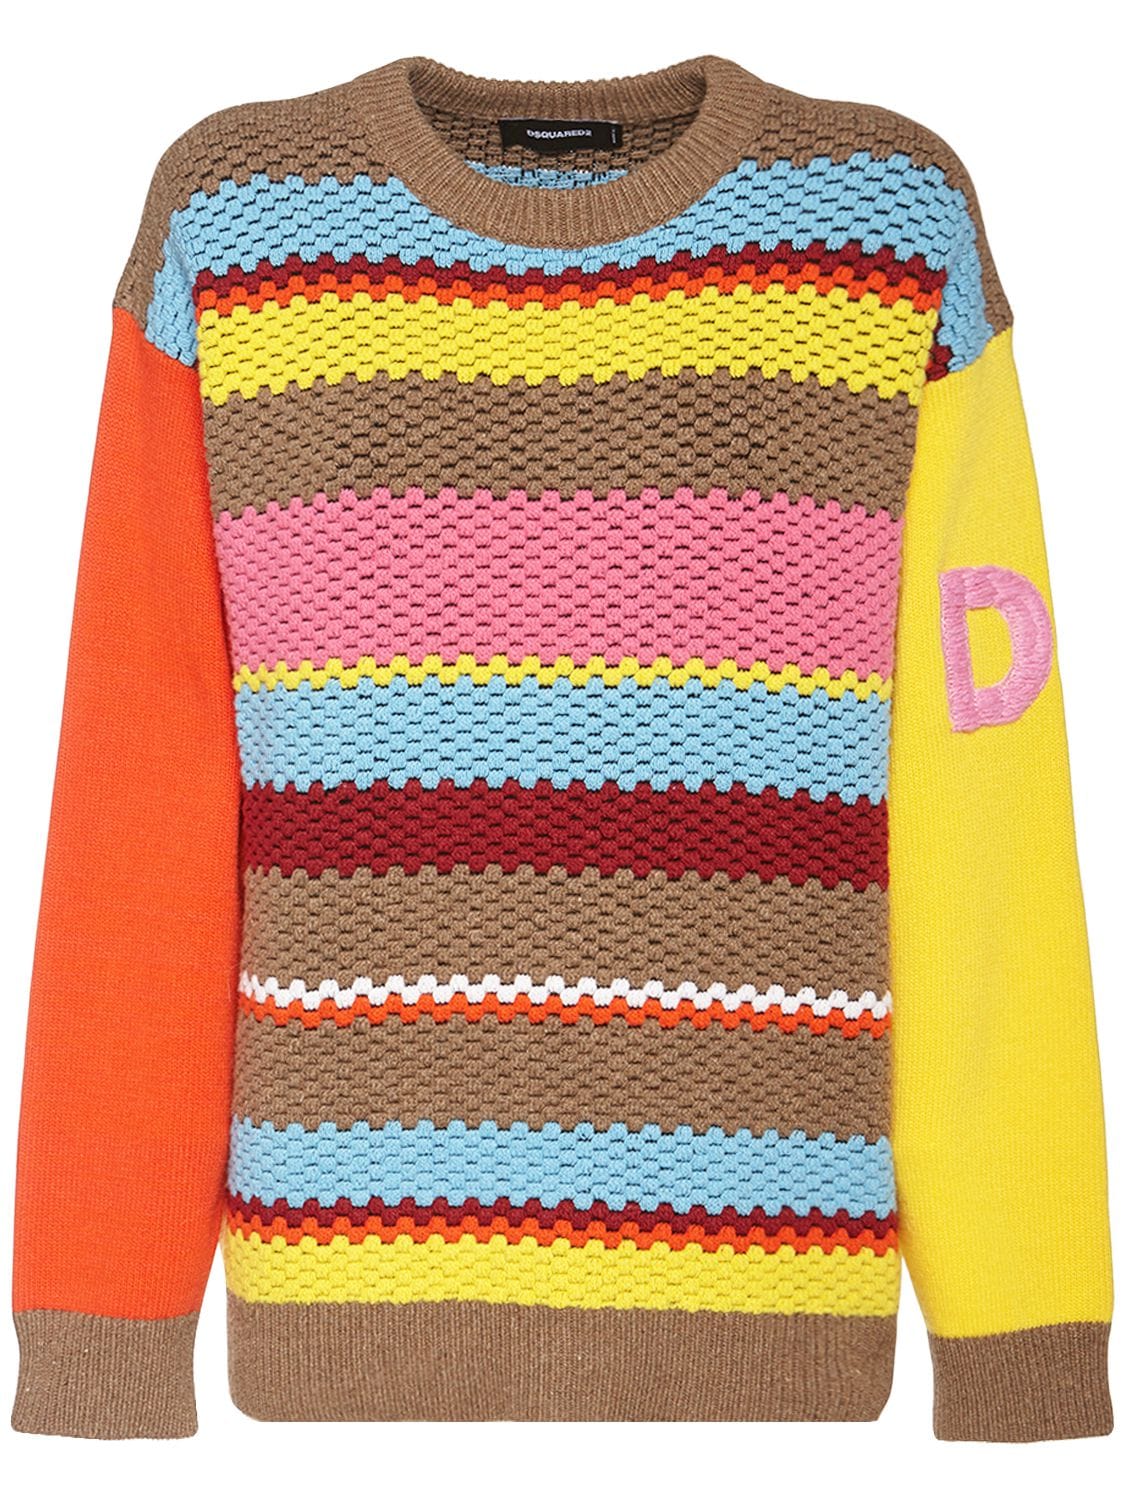 Dsquared2 - Wool blend knit striped jacquard sweater - Multicolor ...